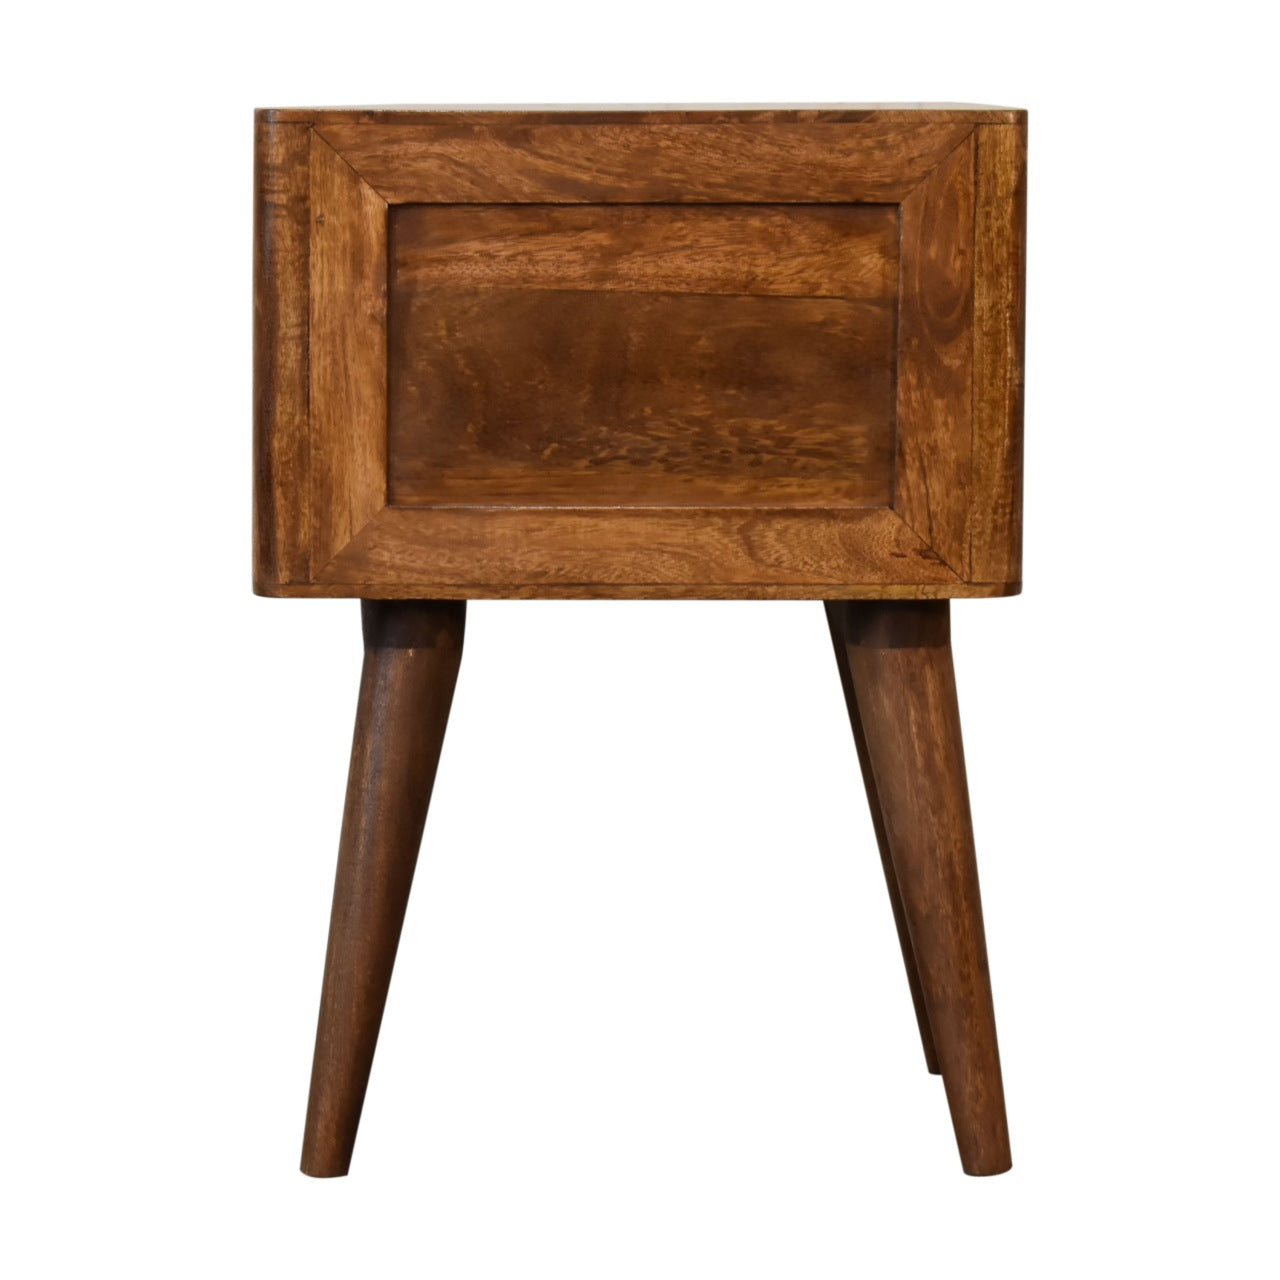 Chestnut Carved Arch Bedside Table 2 Drawer Chest made with Mango Wood - CasaFenix